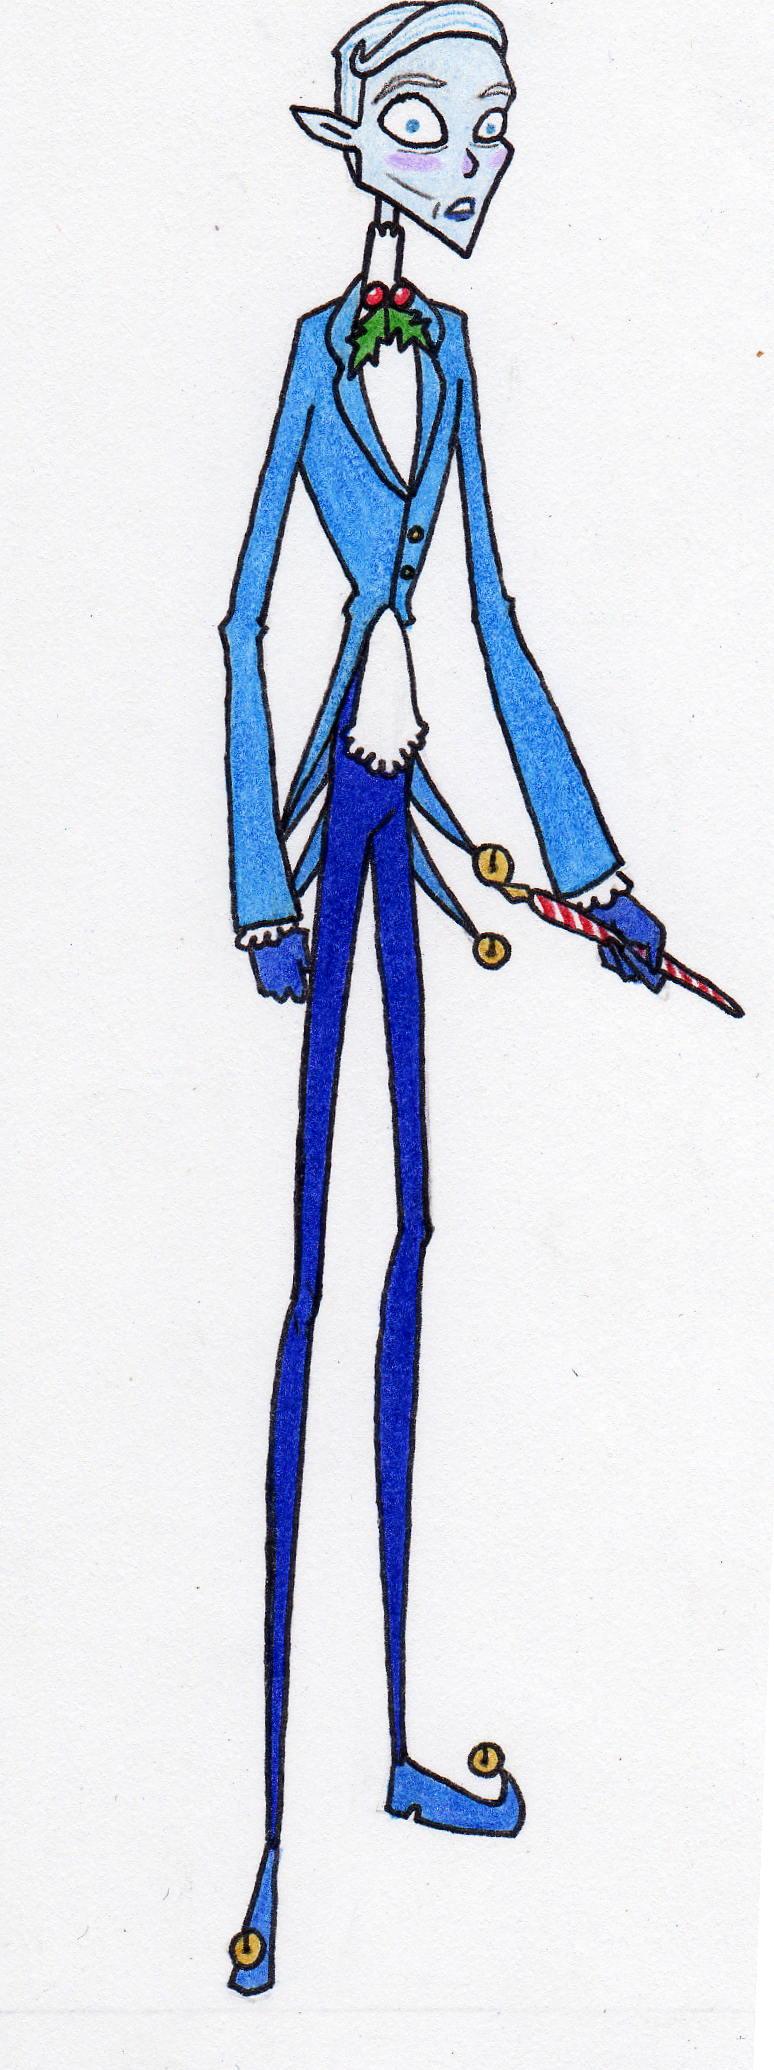 Jack frost, redesign by pooterda